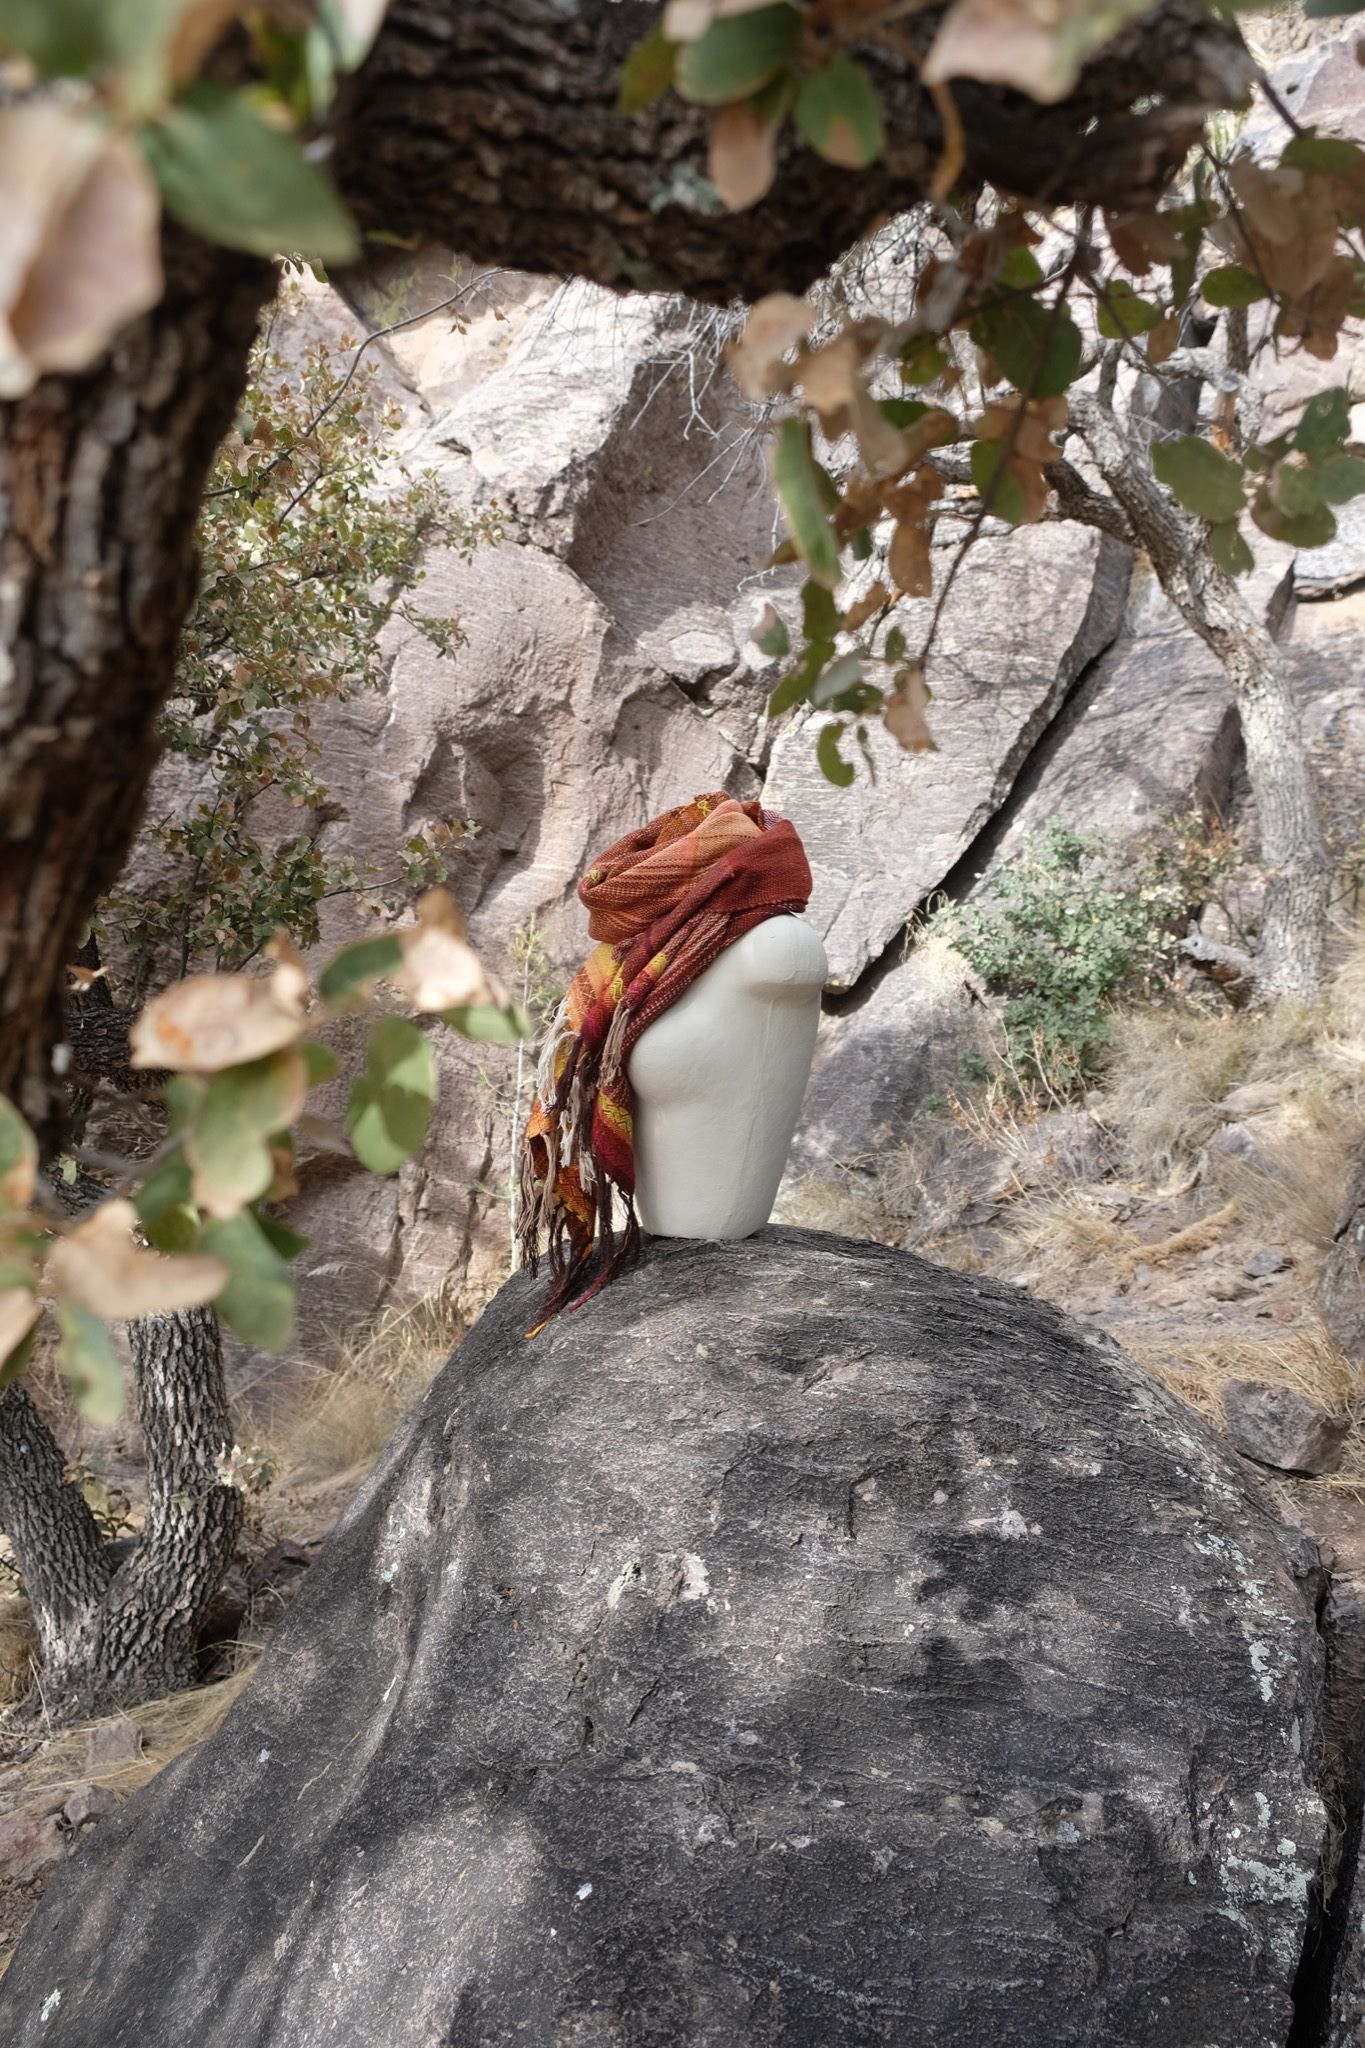 Handwoven red, orange, yellow, brown and white Merino Etherial Scarf on a white mannequin sitting on a boulder